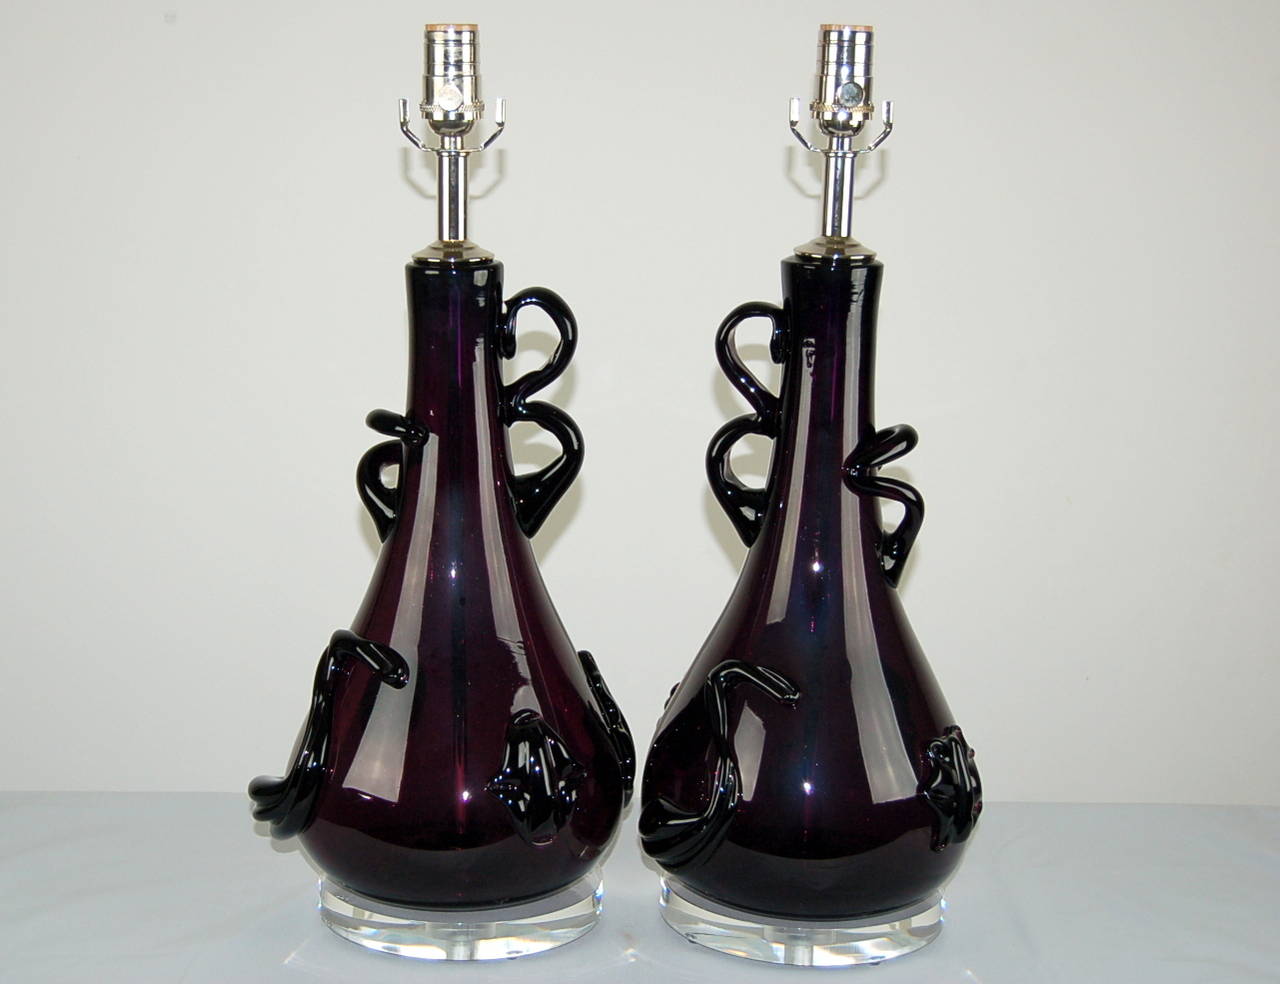 One of a kind!  A matched pair of Medusa-like, abstract Murano lamps in PURPLE. Large badge-like prunts and flailing glass arms - you won't see these lamps on anyone else's table!

The lamps are 22 inches from table top to socket top. As shown,